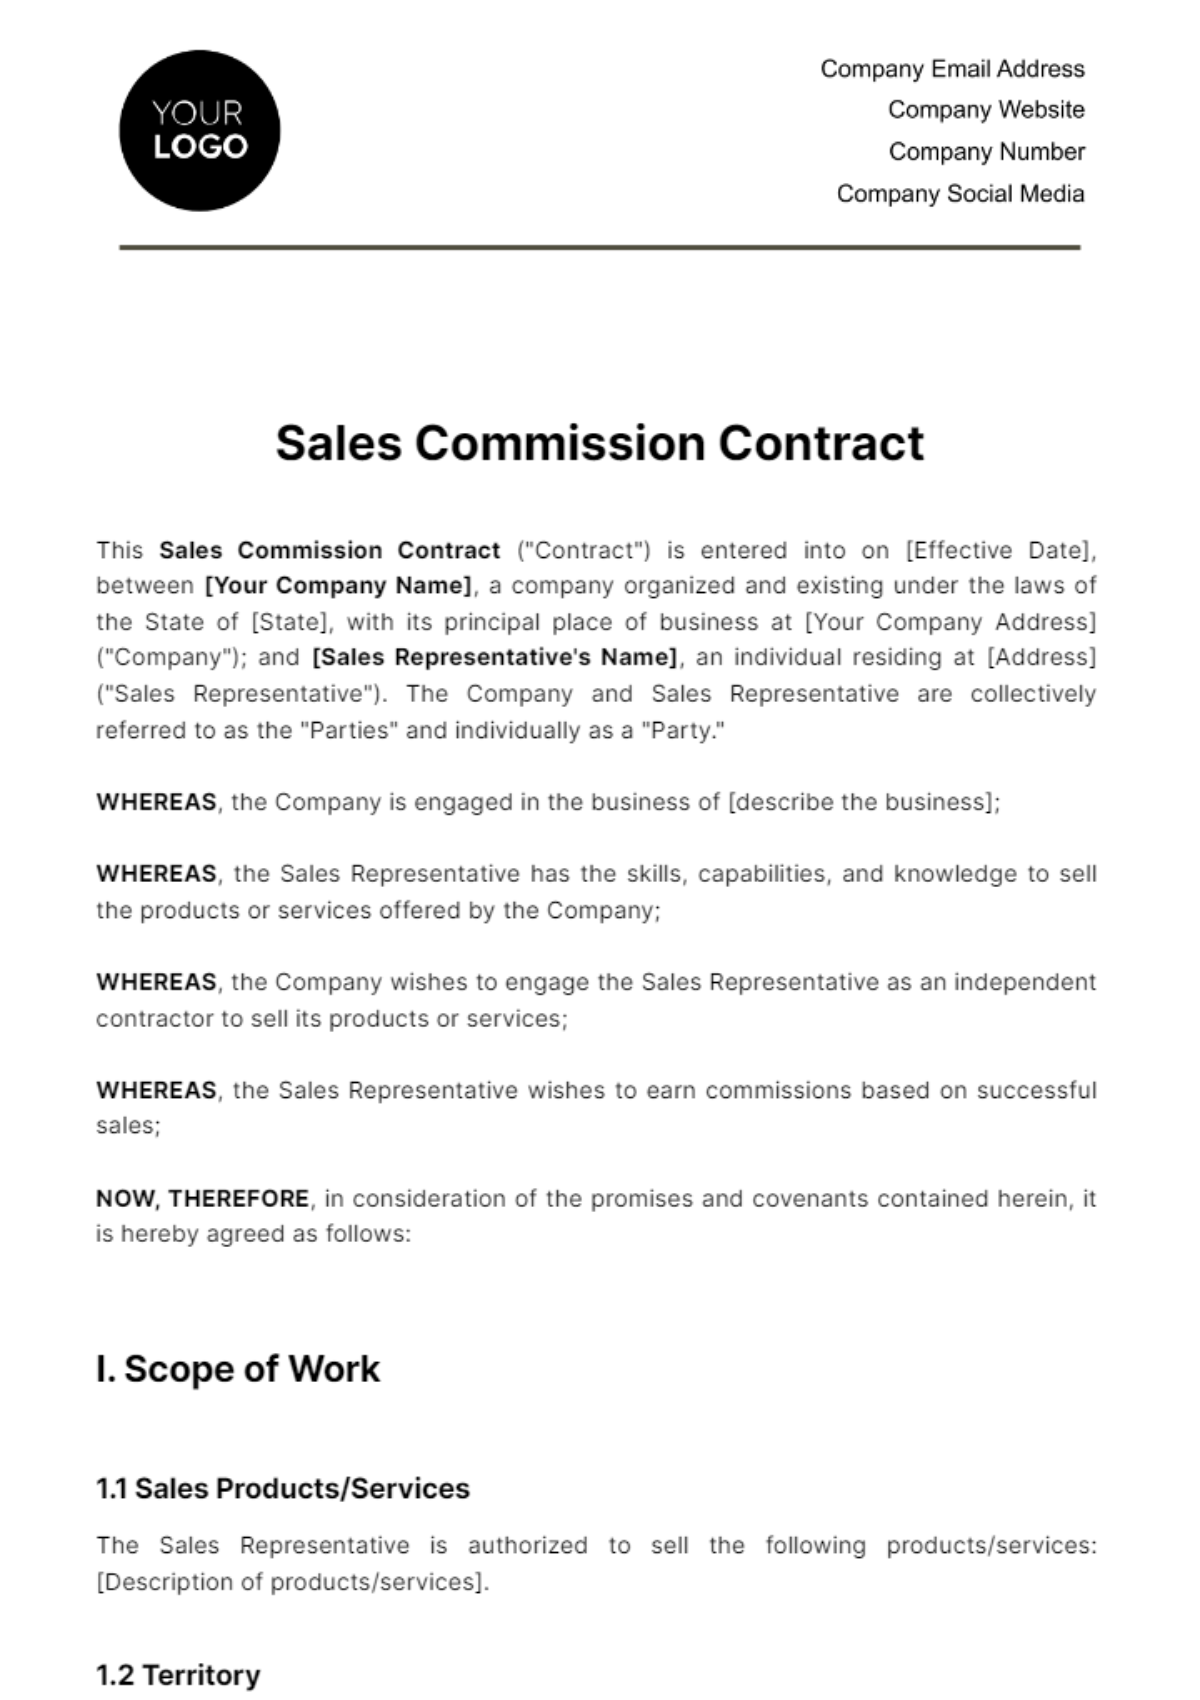 Sales Commission Contract HR Template